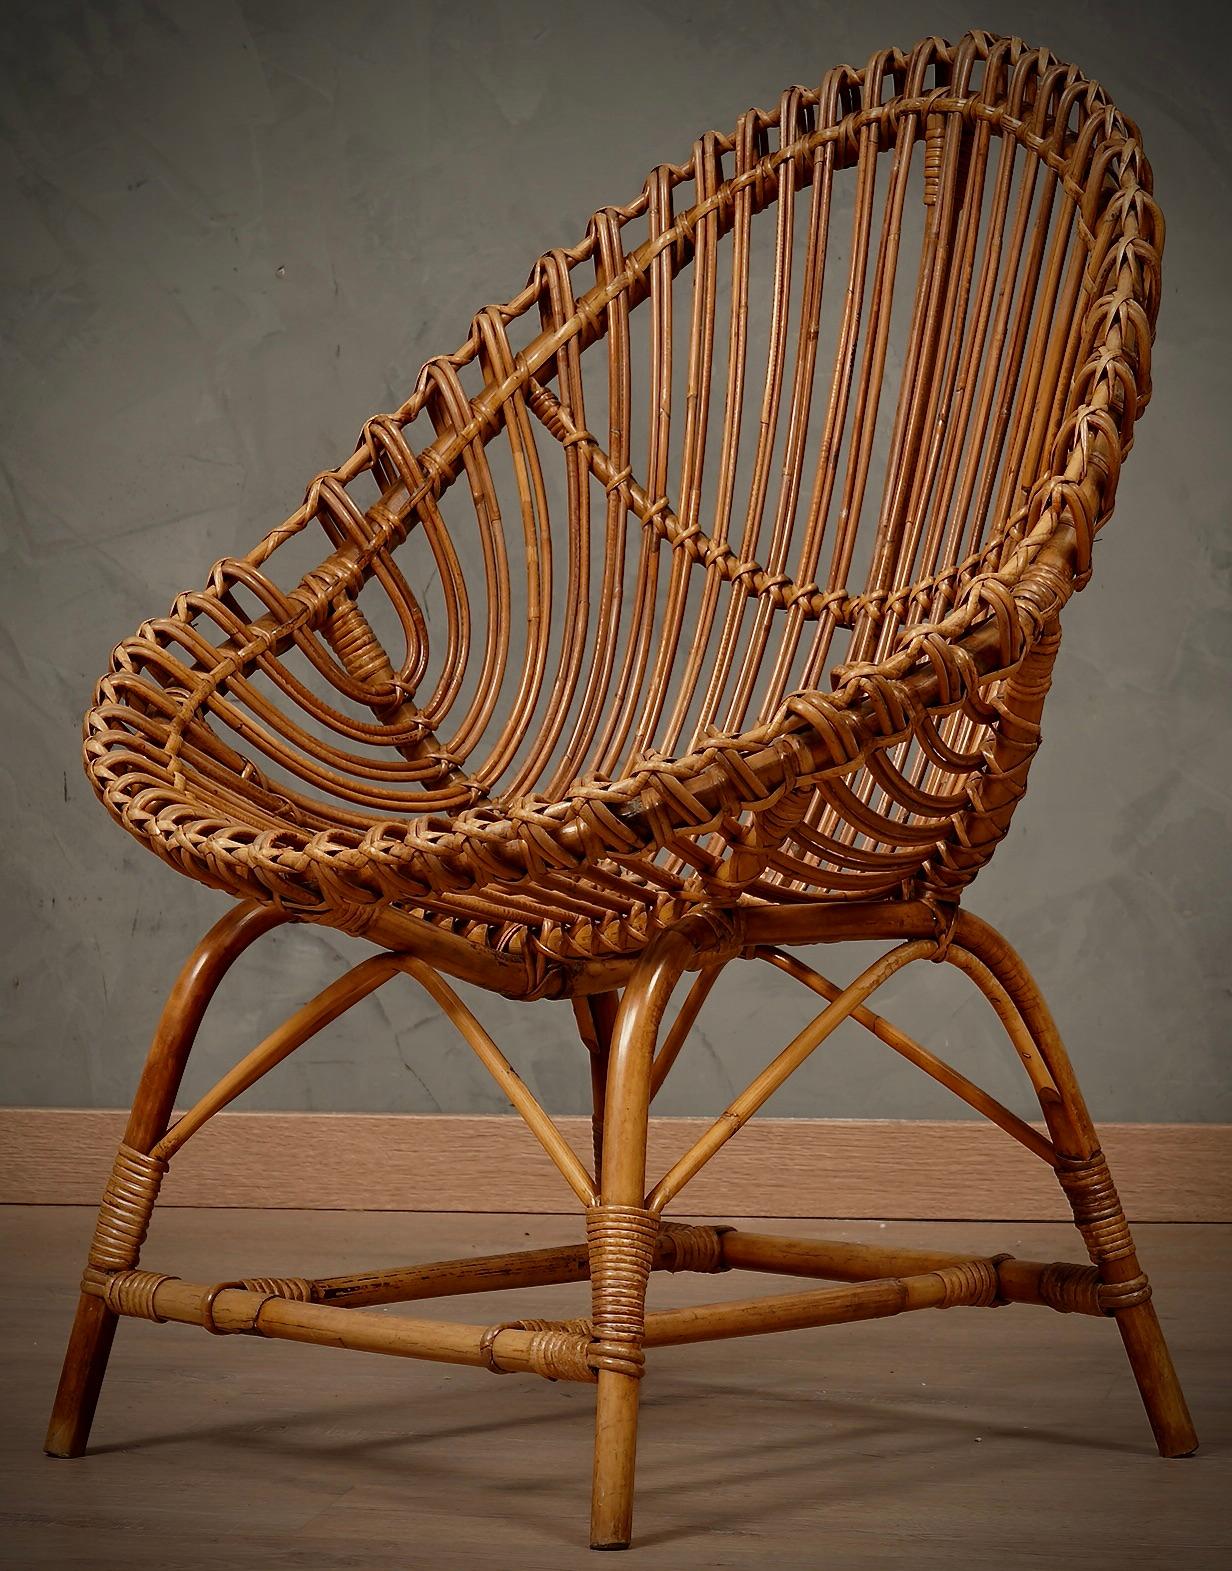 Fantastic series of four rattan chairs by Giovanni Travasa for Bonacina; called 